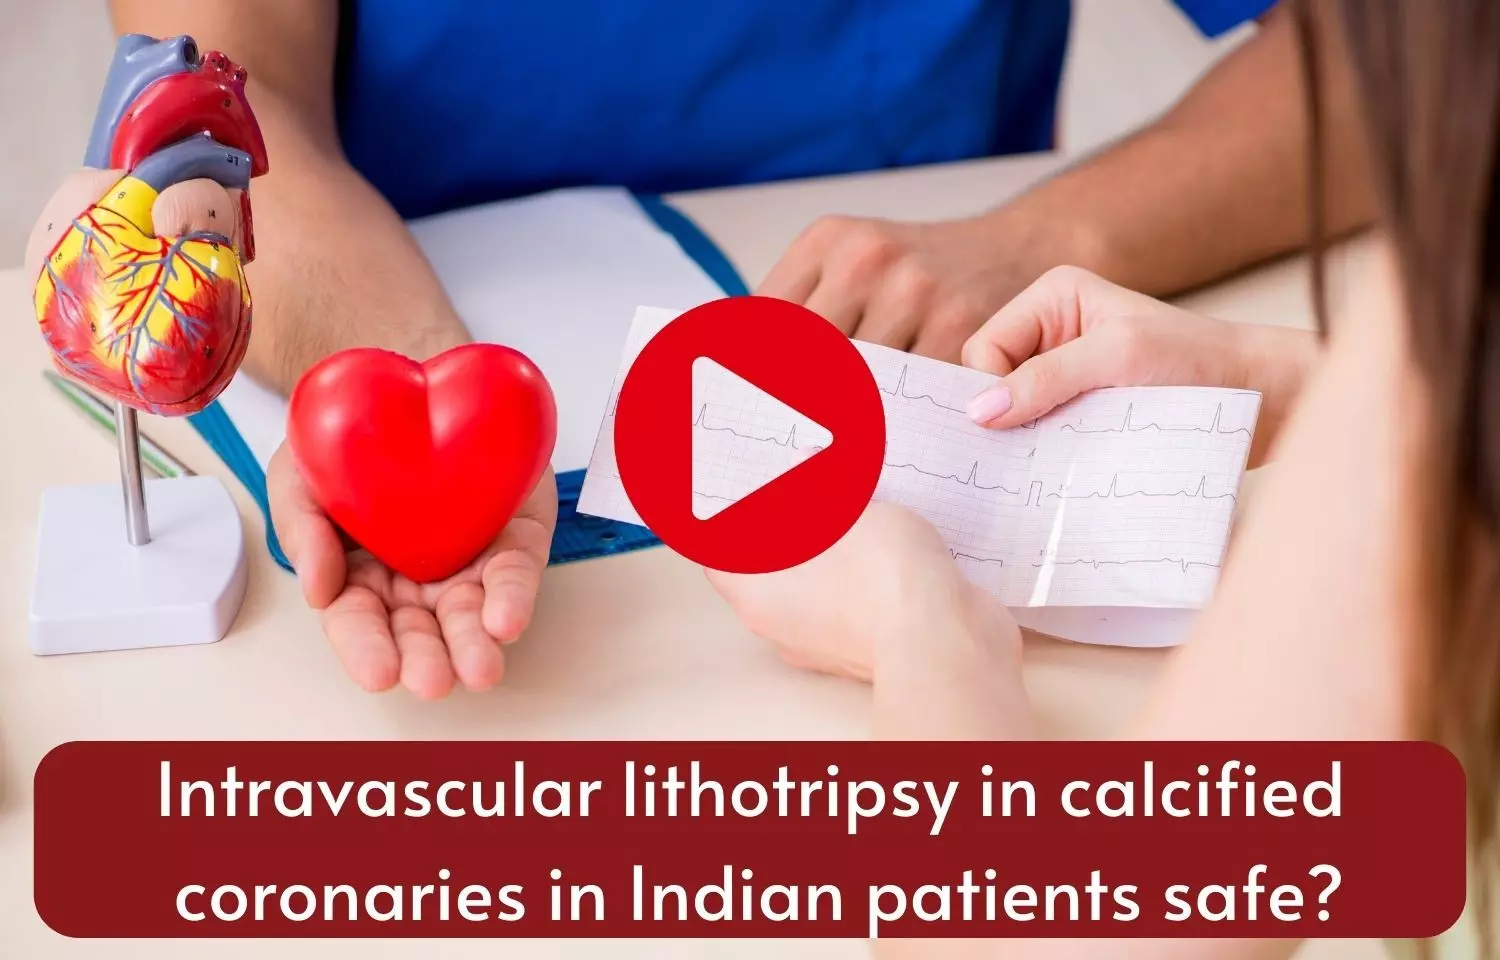 Intravascular lithotripsy in calcified coronaries in Indian patients safe?